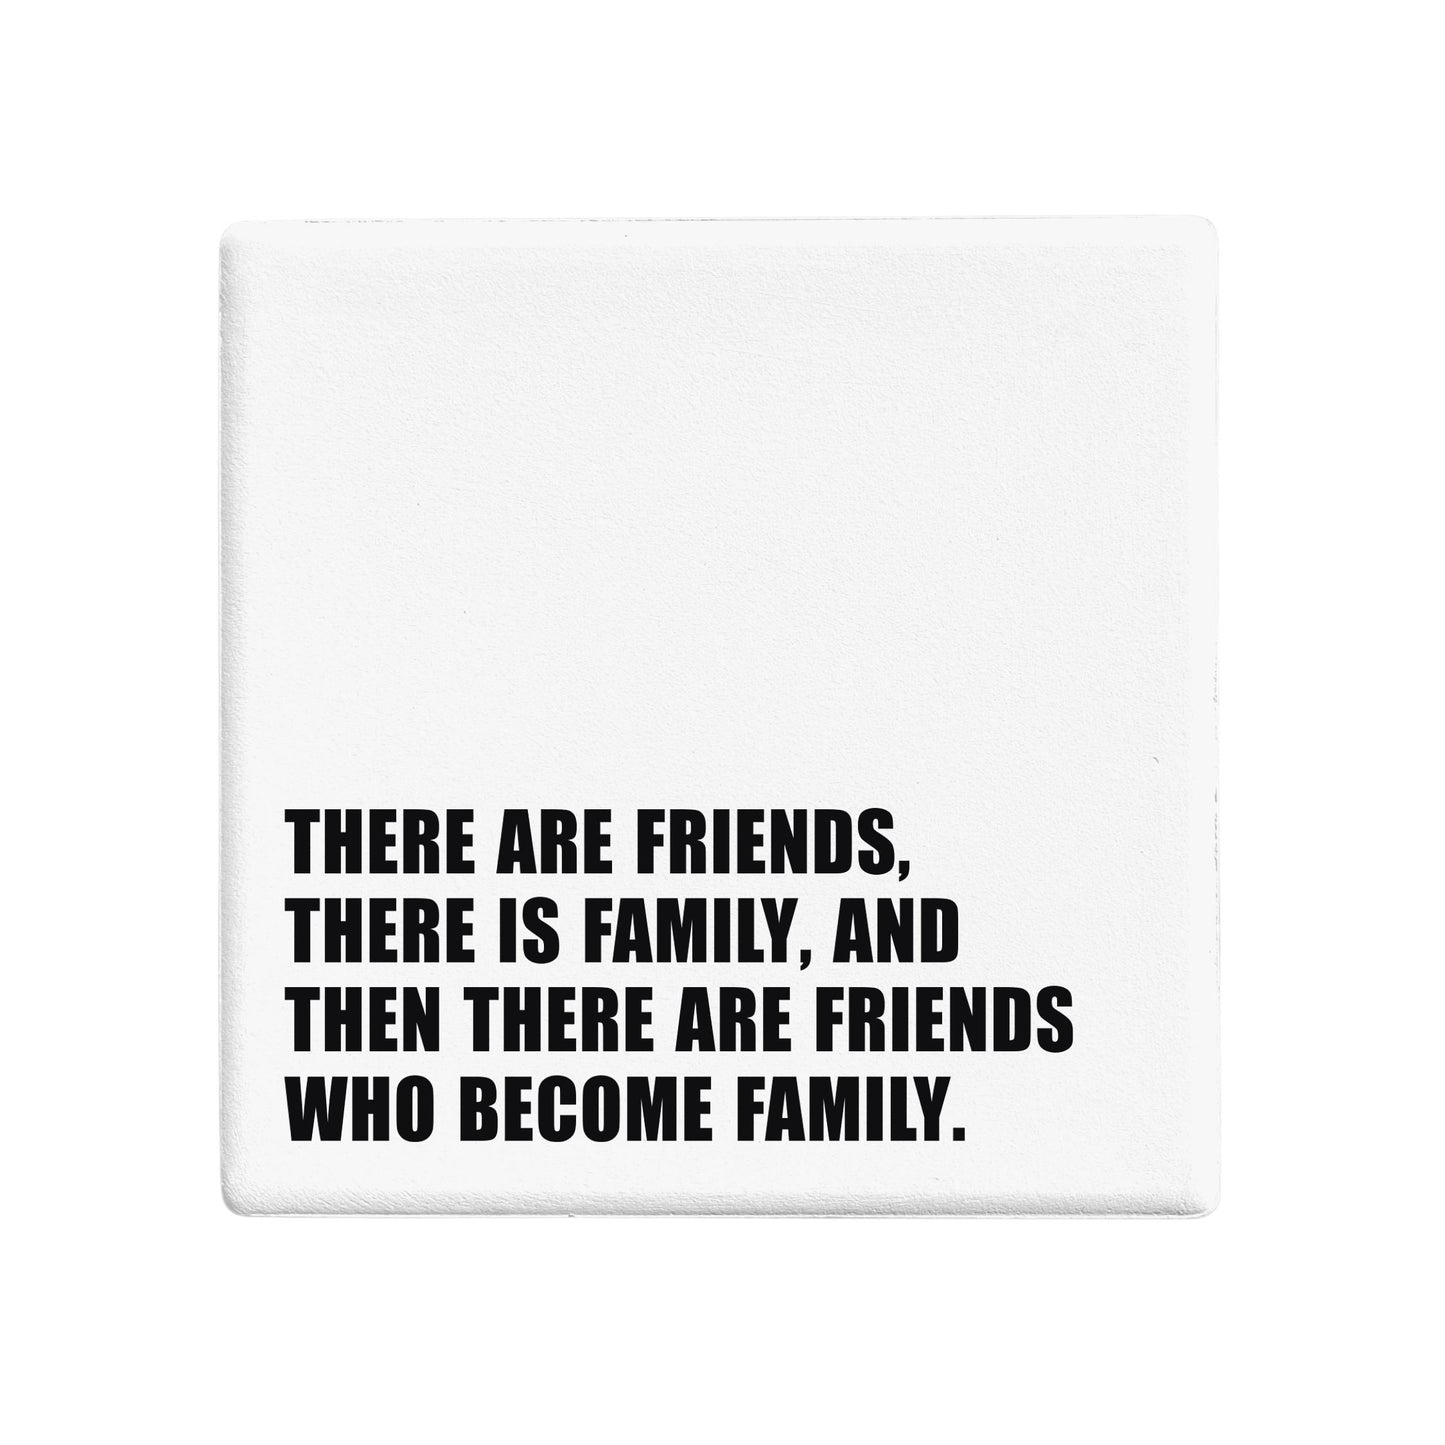 SQUAREWARE - FRIENDS WHO BECOME FAMILY - Let's Be Frank Australia